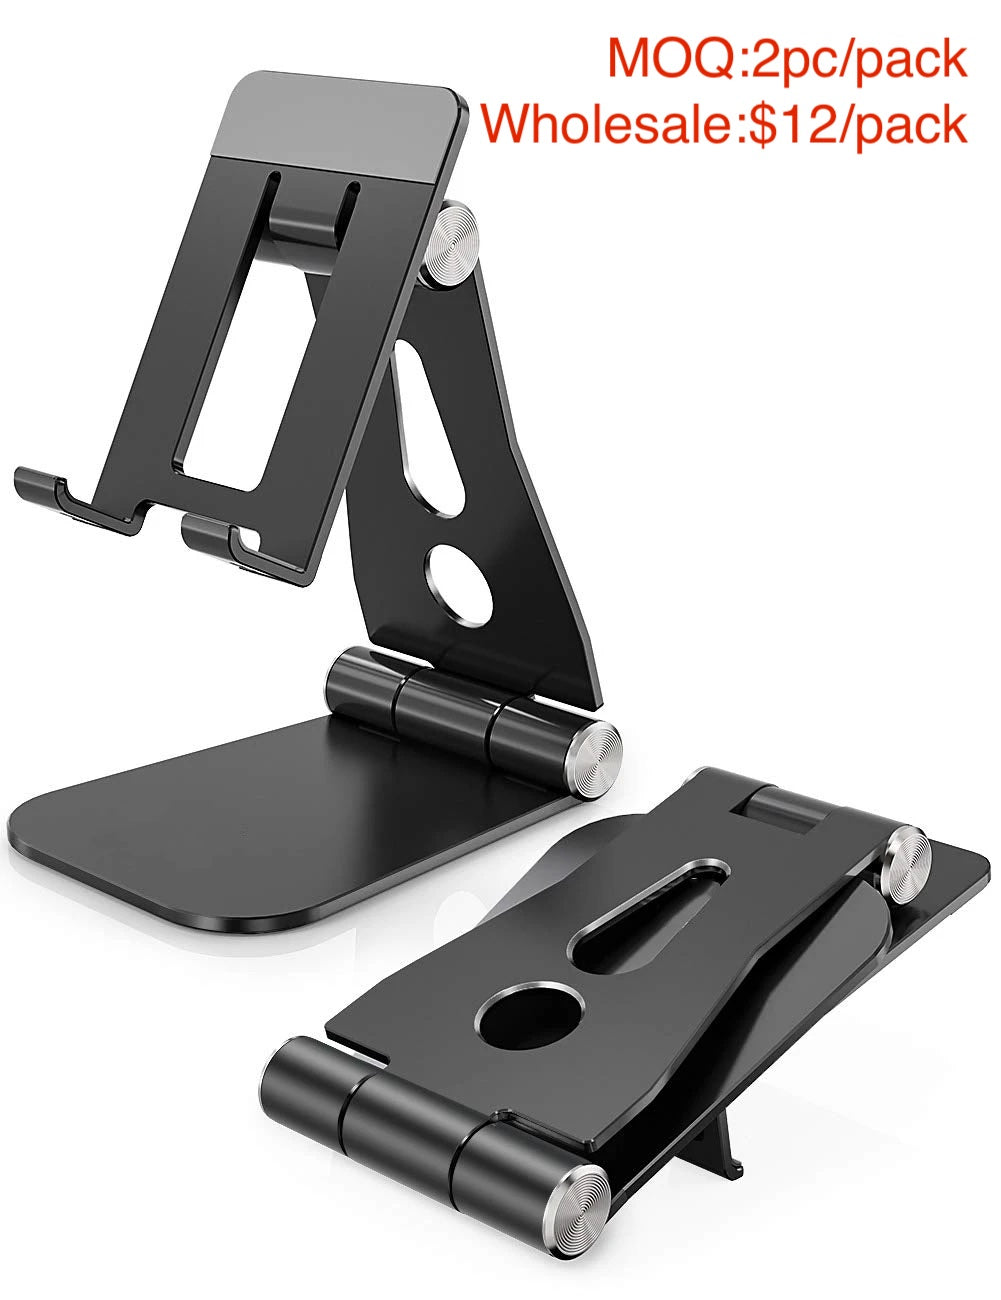 BECWAREDouble folding aluminum desktop office cell phone stand for 7-10 inch 2pc/pack